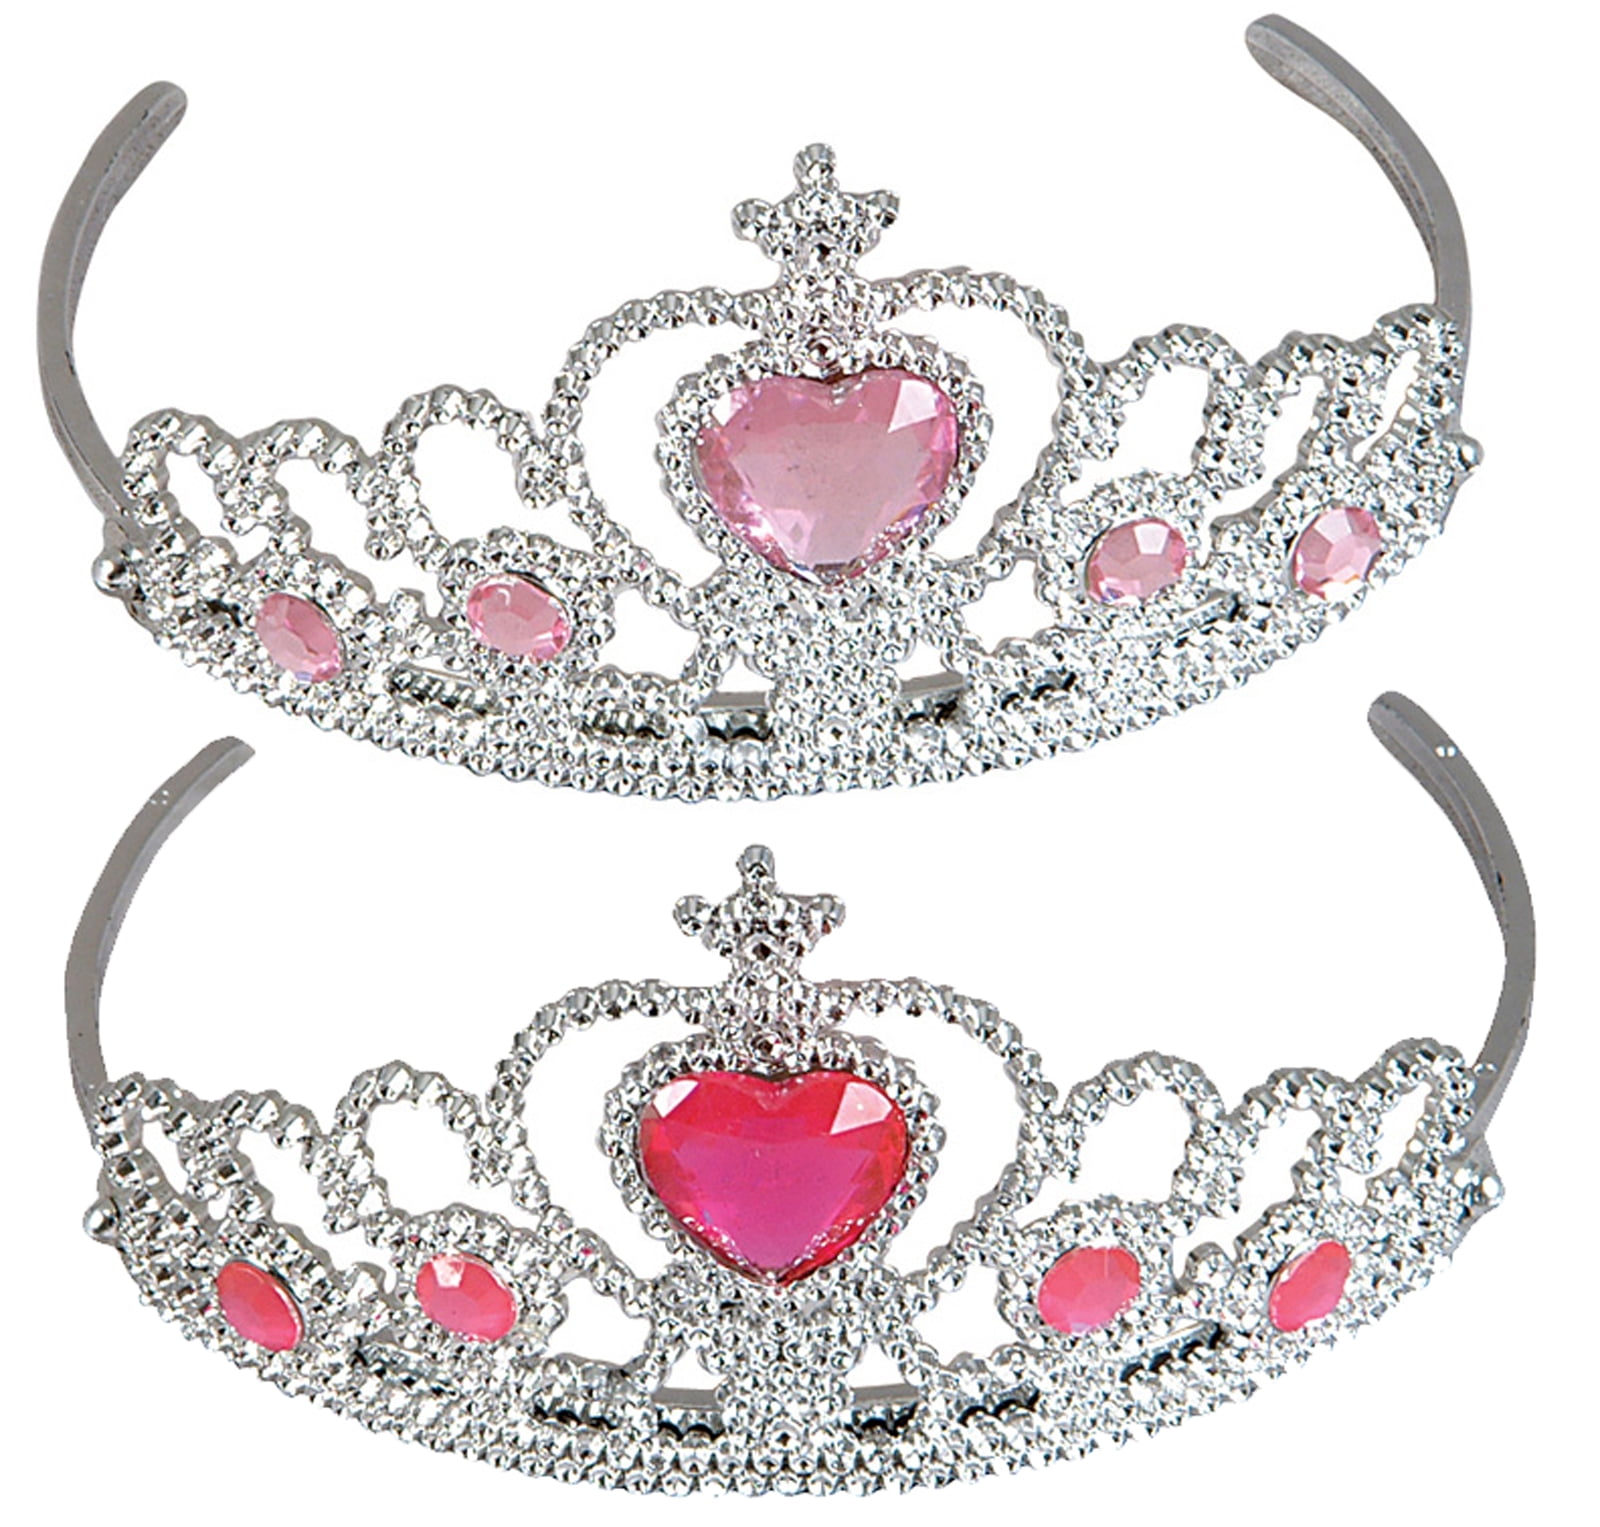 Passenger Princess Heart Patch Pink Girlie Crown Embroidered Iron on P –  Patch Collection